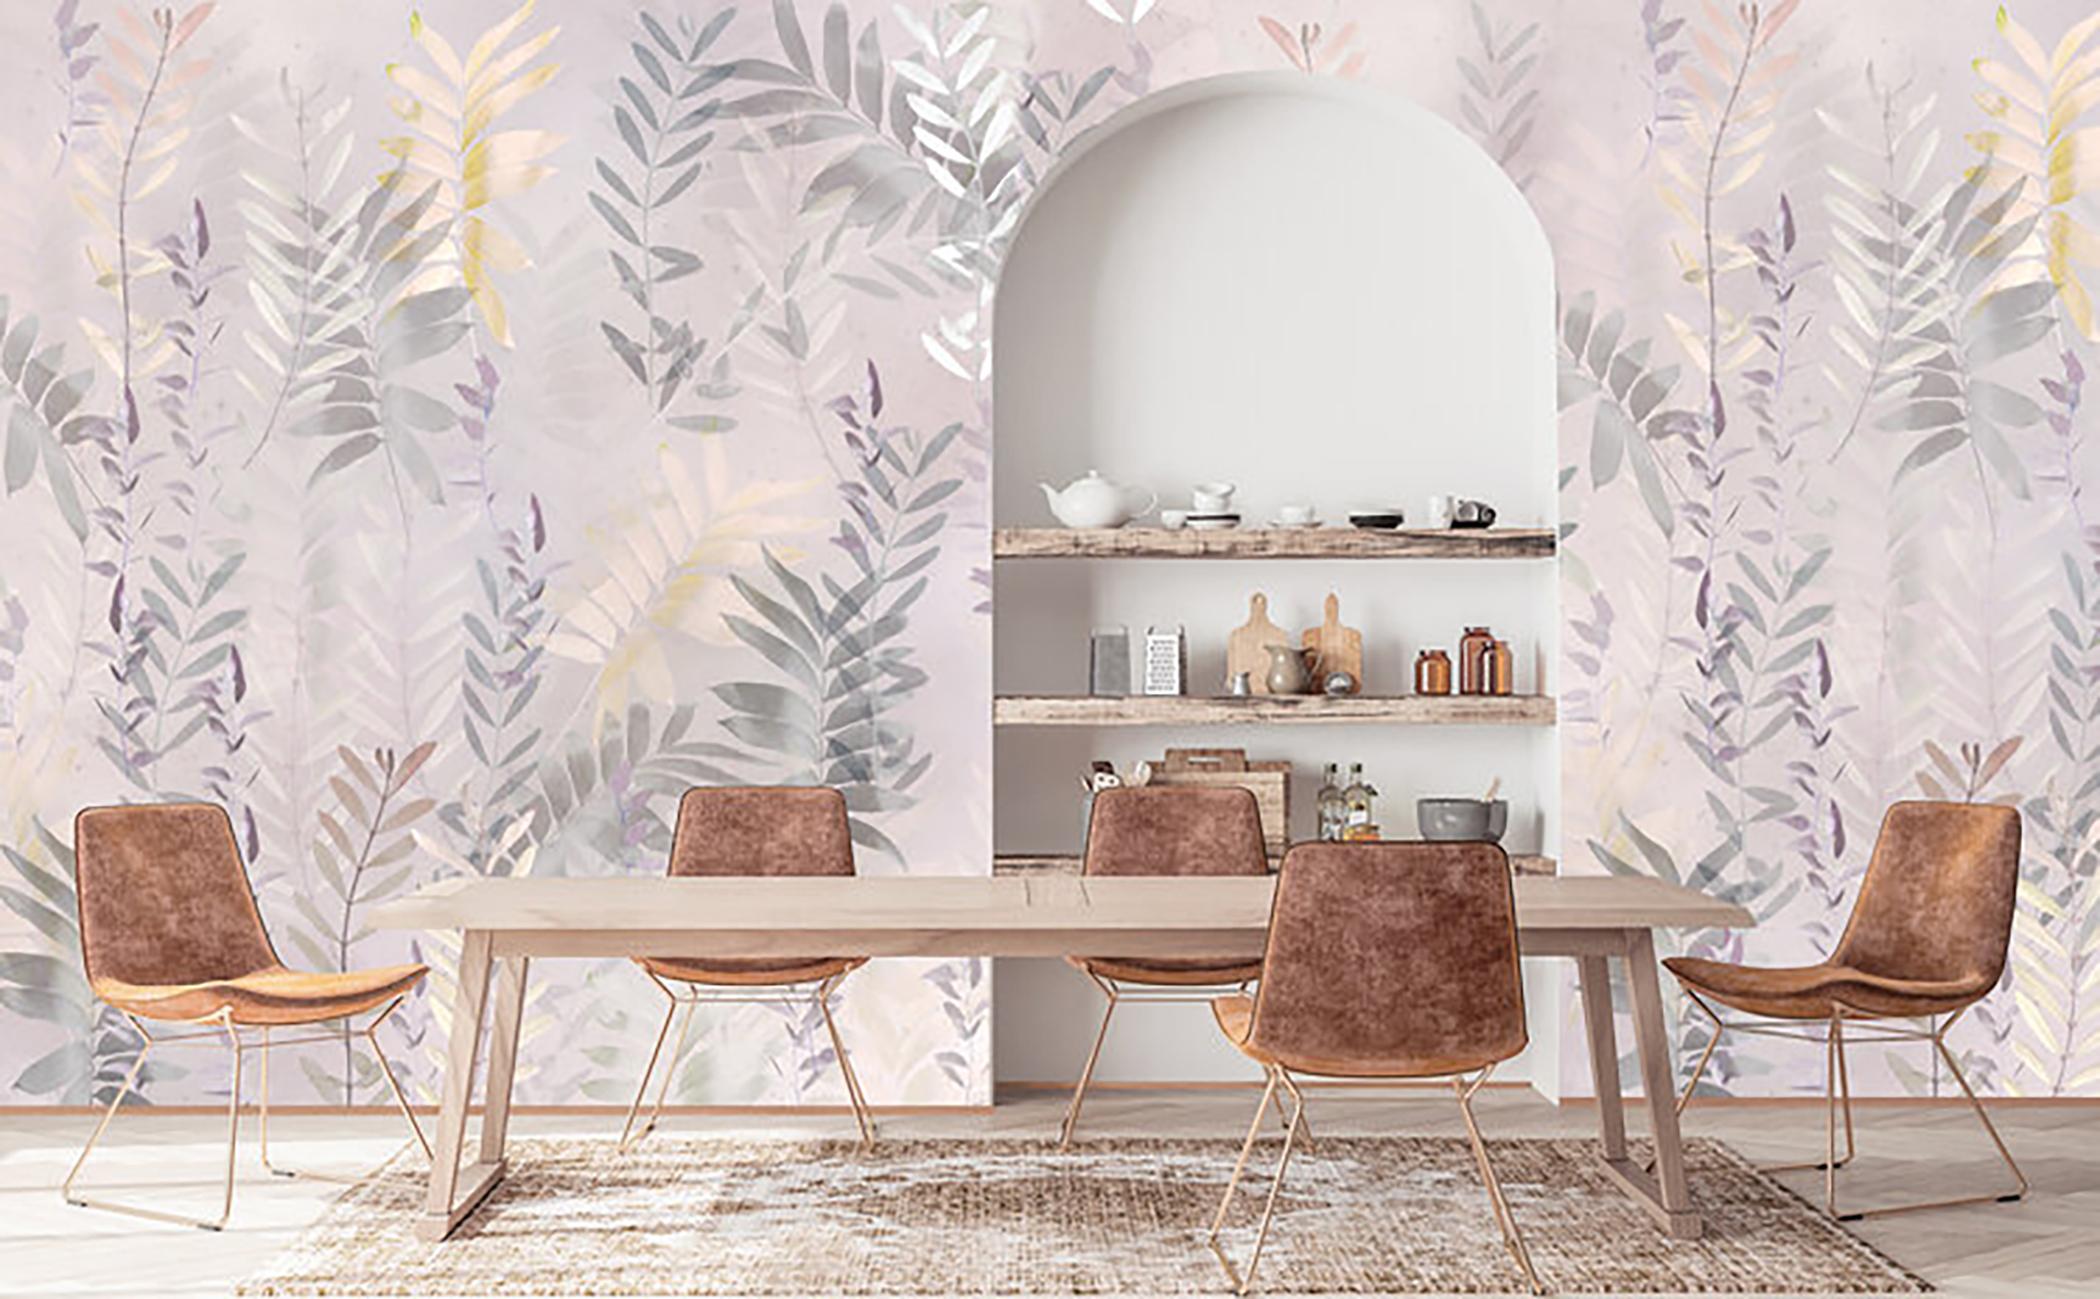 Ferngully wall covering by EDGE Collections.

As we move into unchartered territories with the world around us, we sought to create a collection with strong, positive symbolization. The Maori people believe Ferns represent new life and new